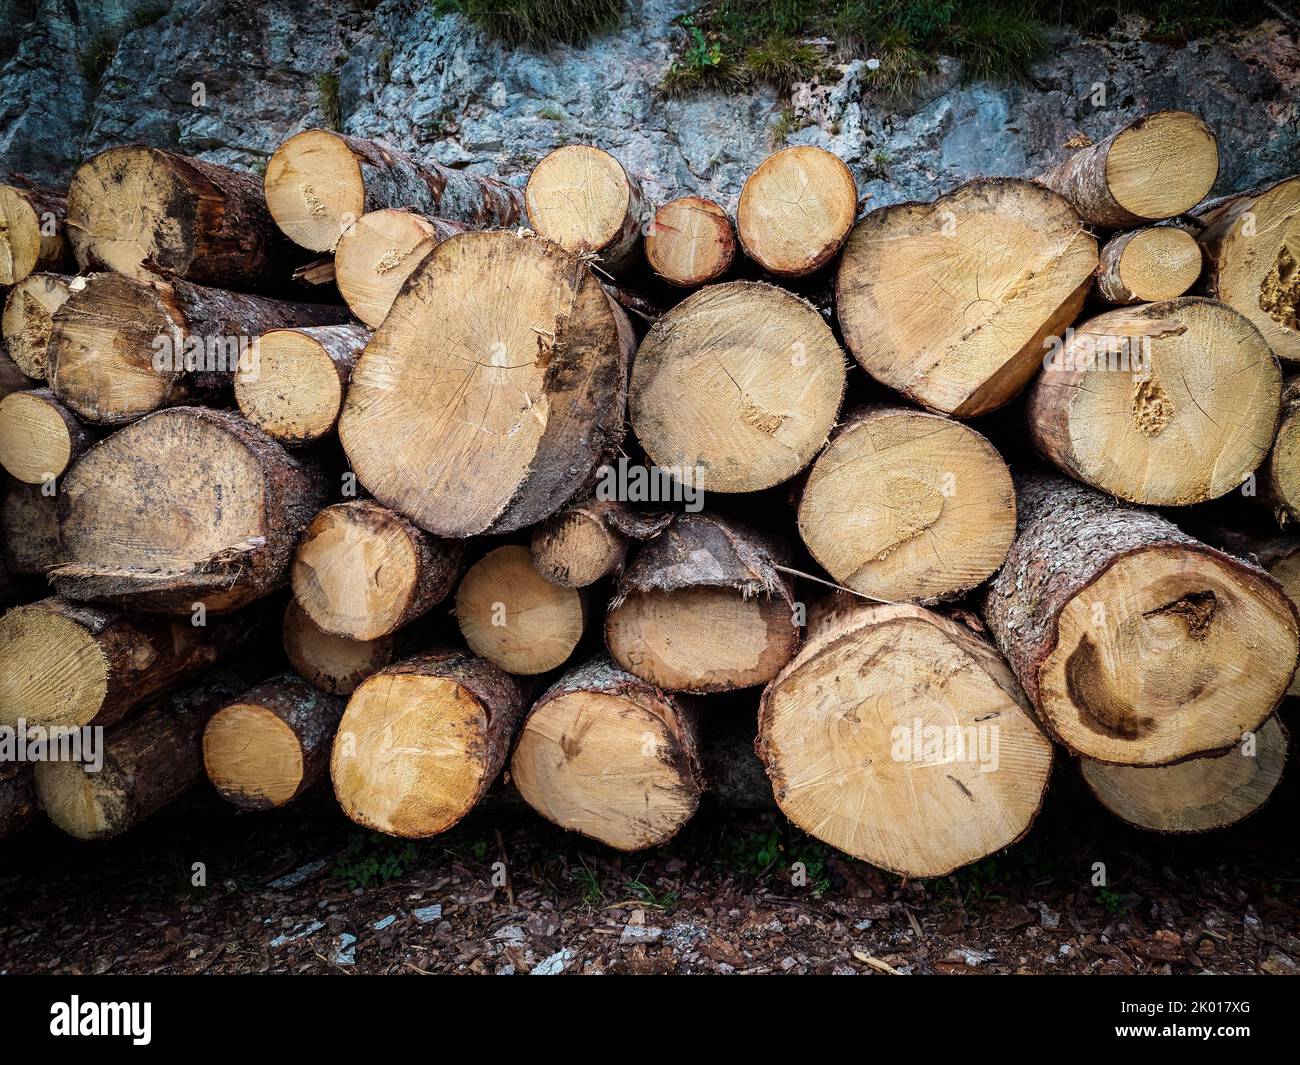 A pile of felled tree trunks ready for industrial use and for heating due to an energy crisis Stock Photo